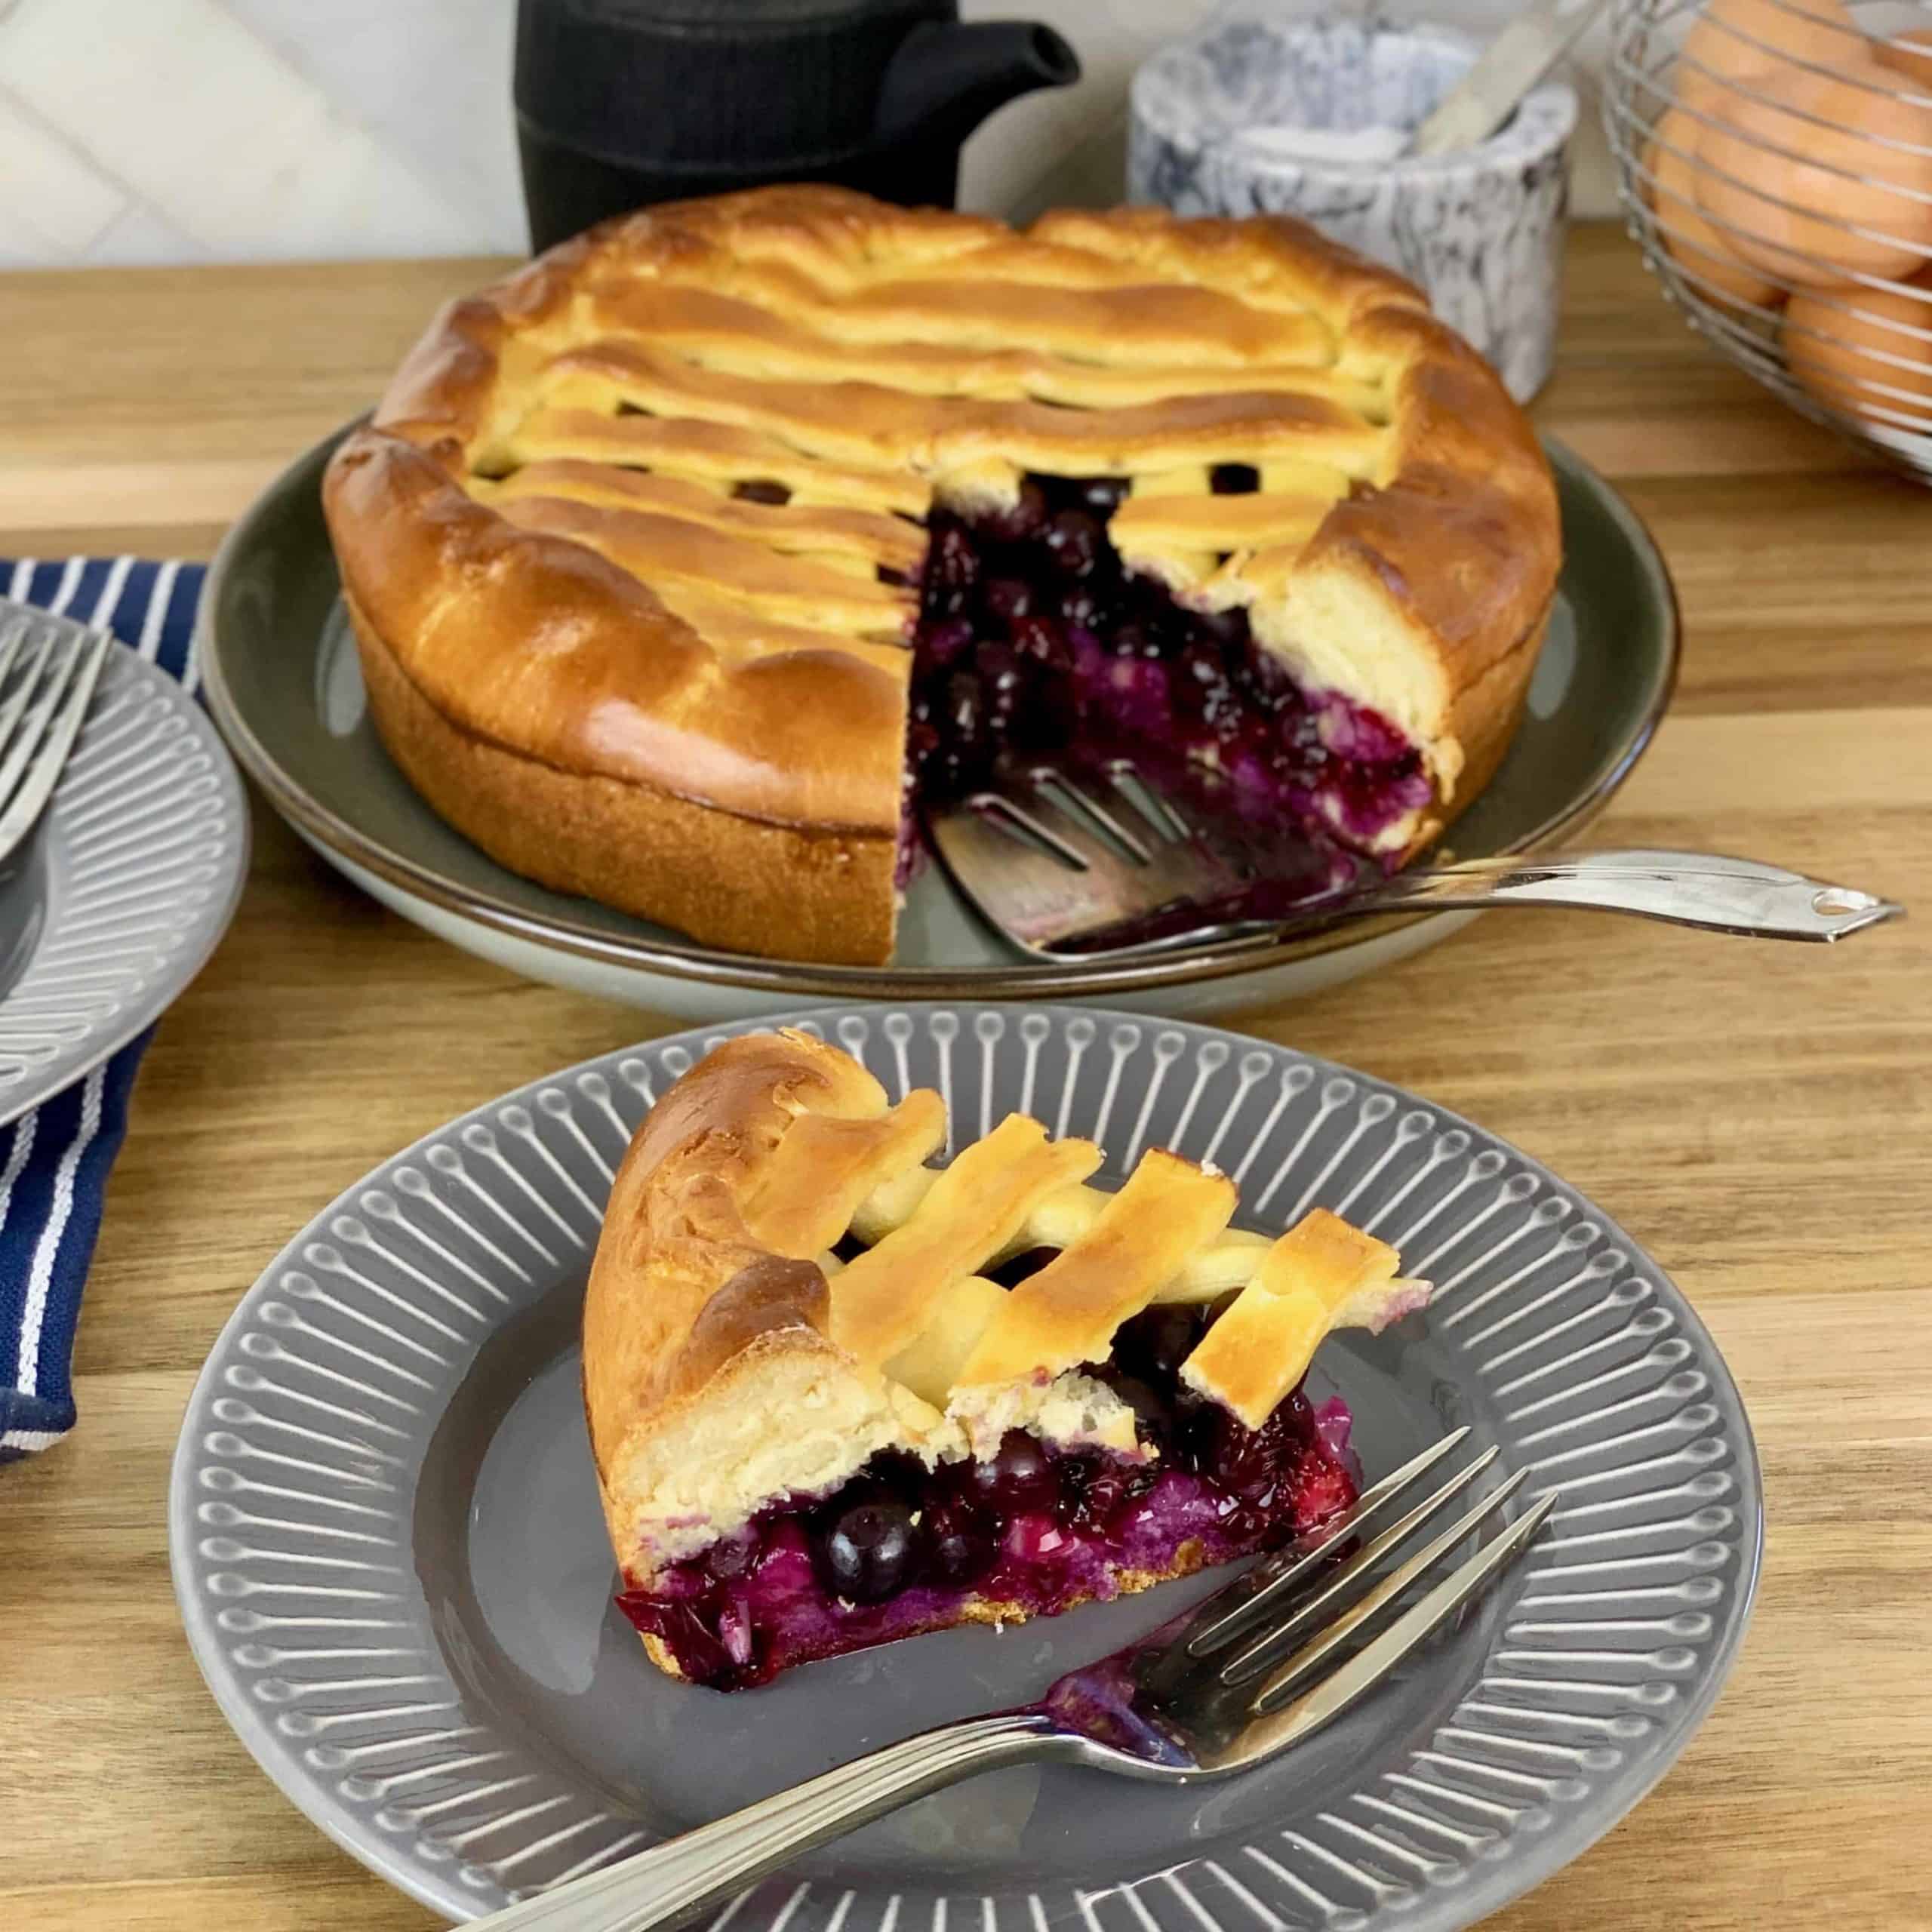 Russian Blueberry Pie made with Yeast Dough